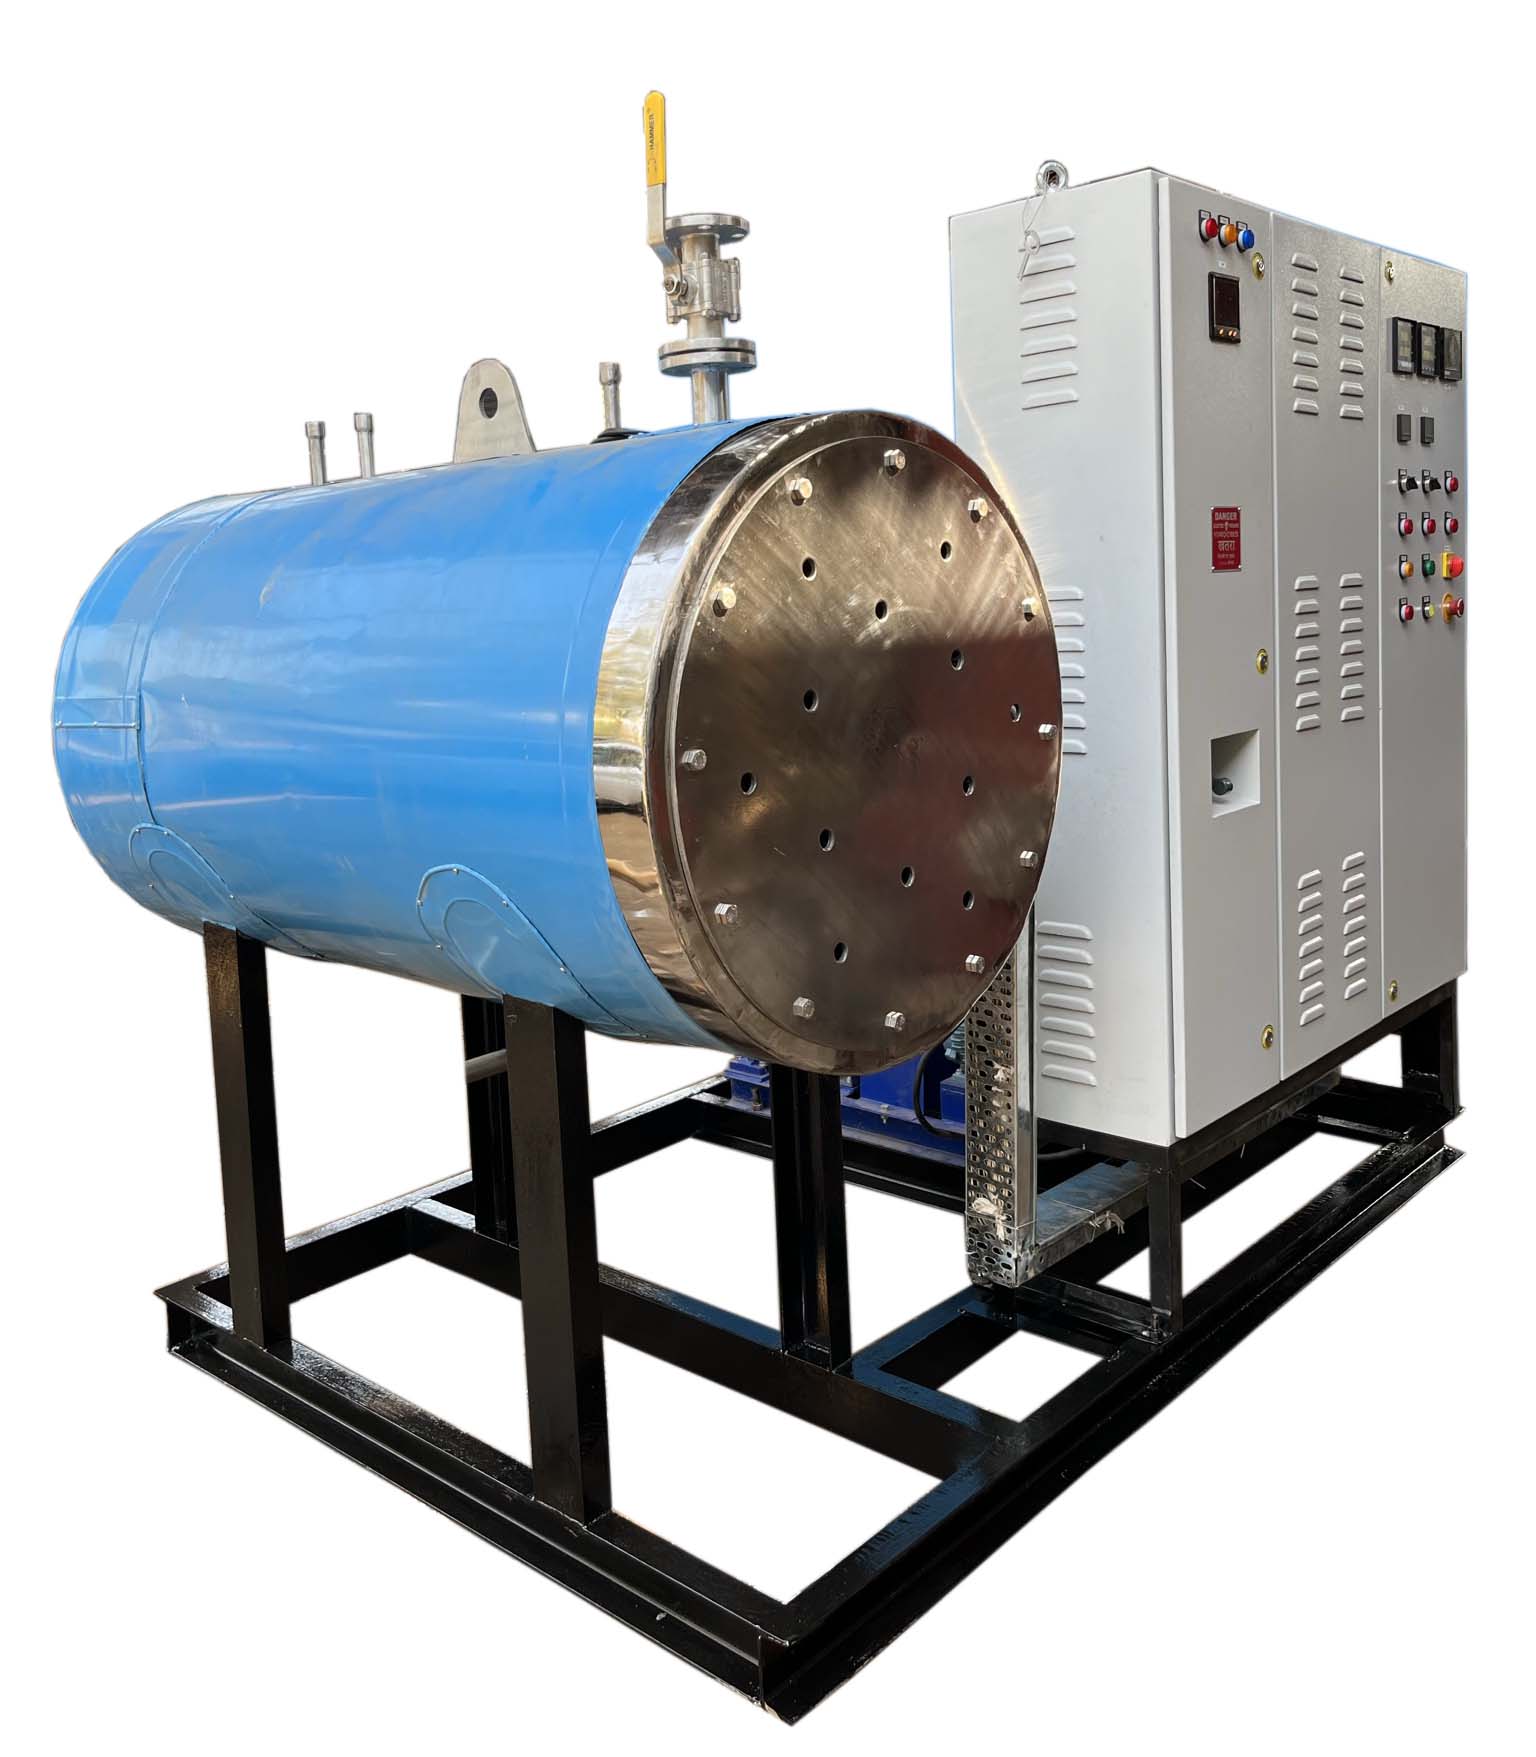 http://hithermboilers.com/wp-content/uploads/2022/07/ELECTRIC-HOT-WATER-GENERATOR.jpg